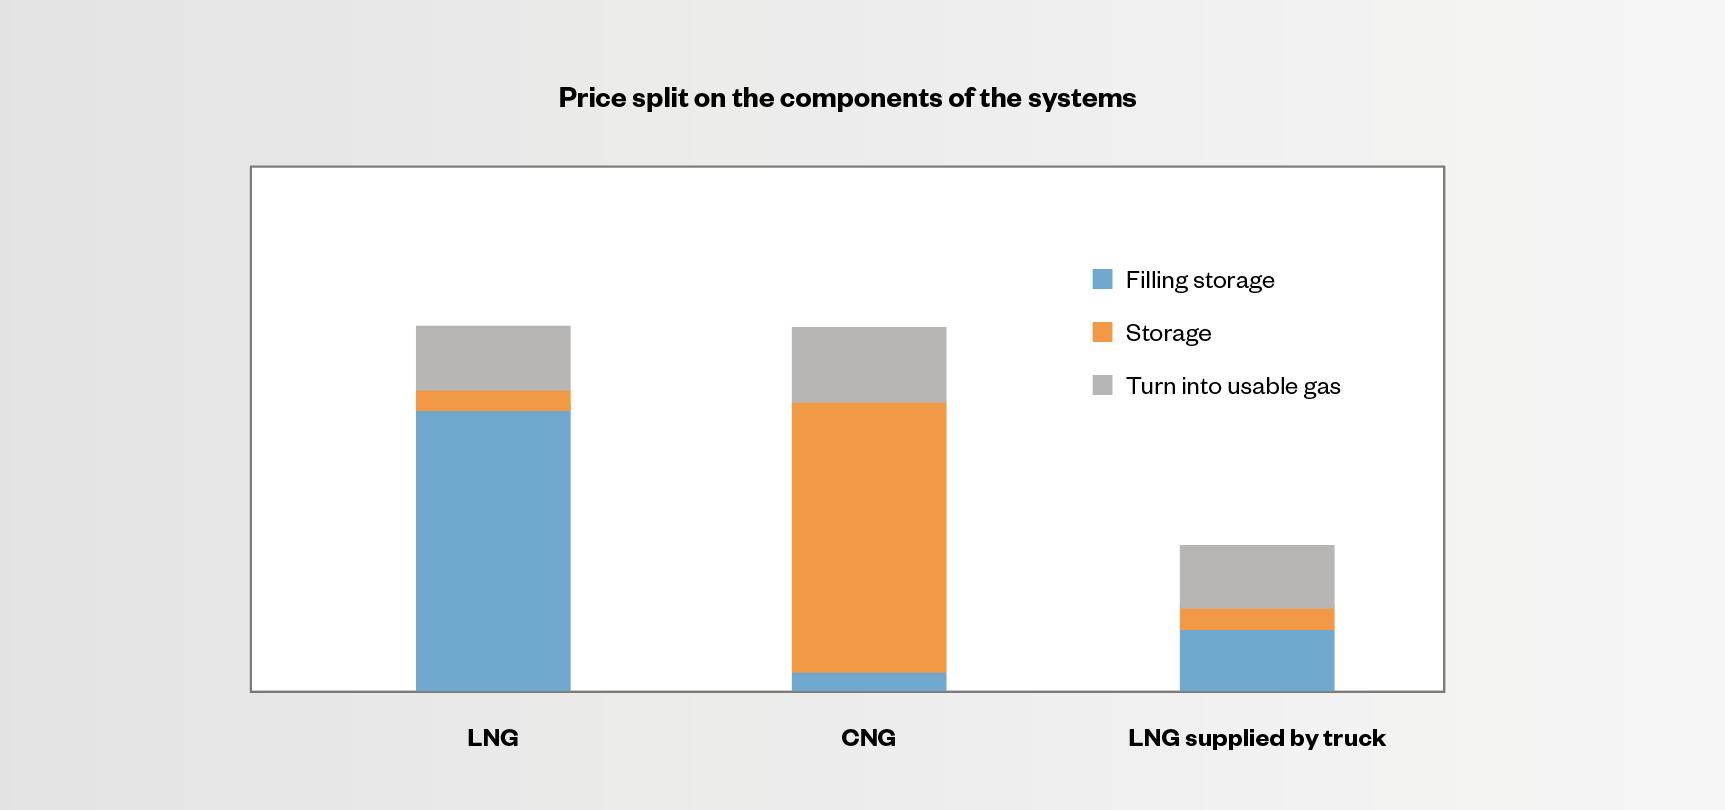 Fig. 3 - A rough price split between the different solutions for a 100 MW power plant at the break-even point as well as a comparison to the cost of a system supplied by LNG trucks.